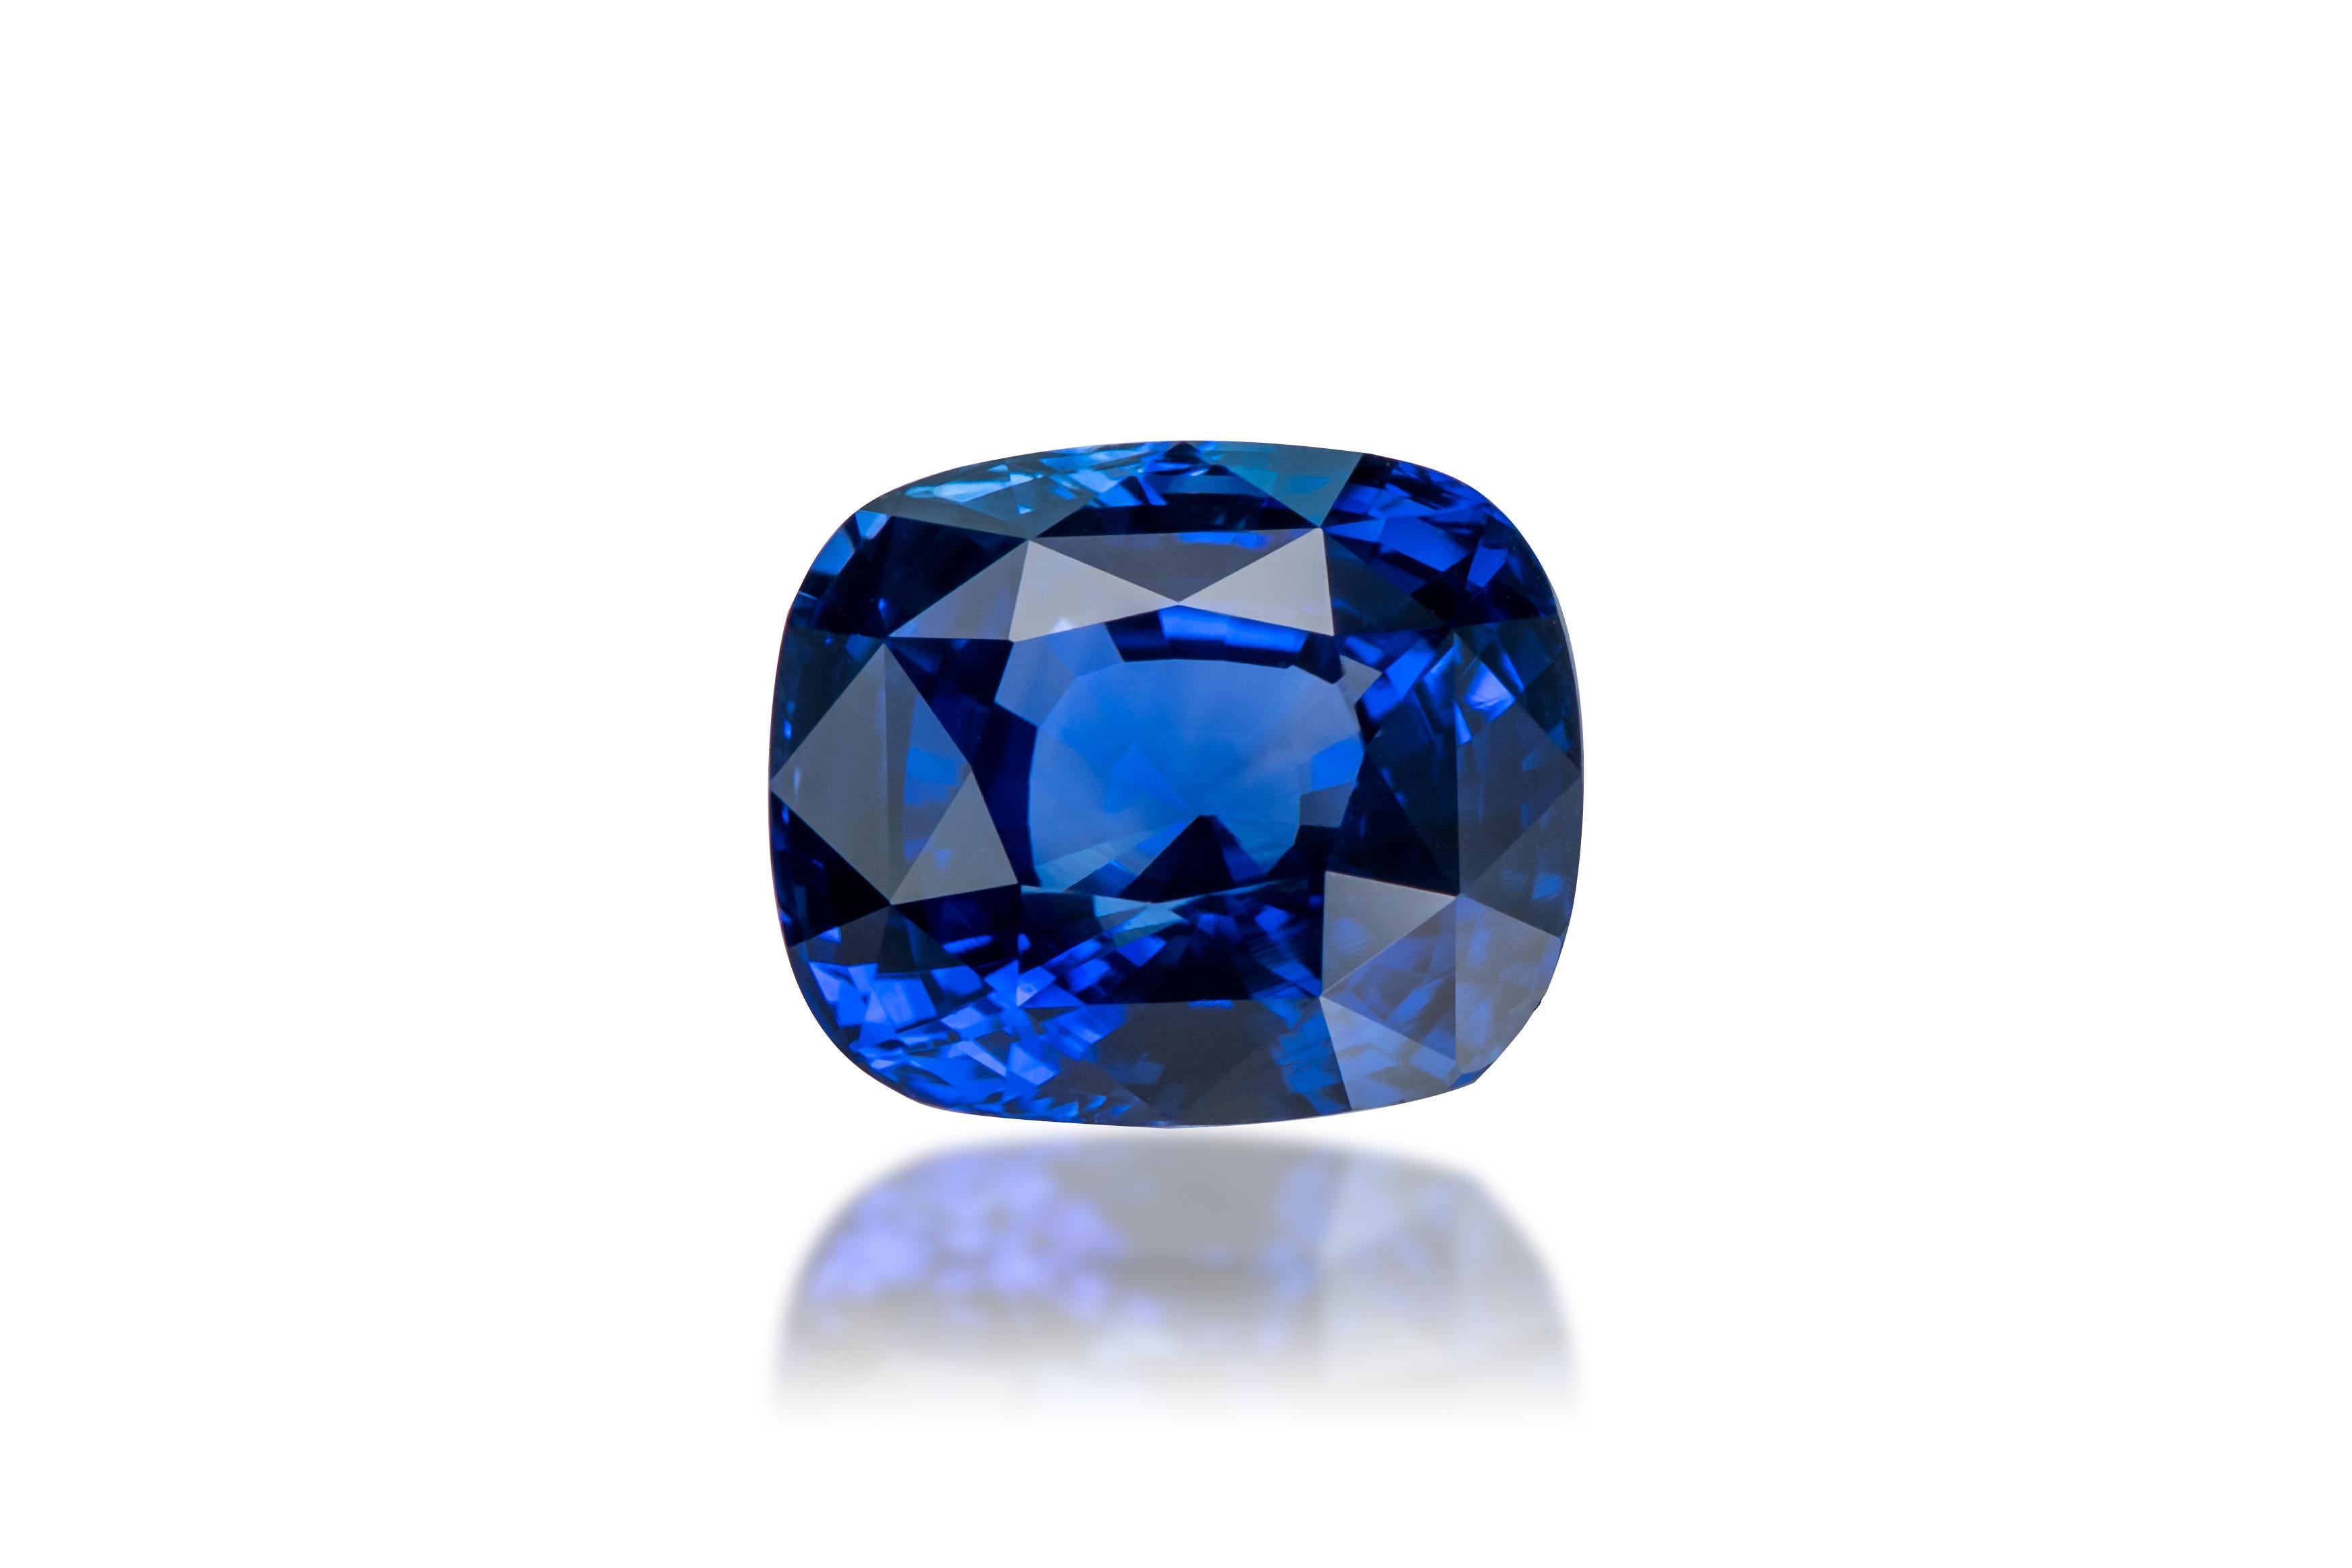 Sapphire: Vivid Blue Sapphire, Royal Blue
Origin: Madagascar
Shape: Cushion Cut
Carat Weight: 8.68 cts
Dimensions: 12.02 x 10.27 x 7.68 mm

This beautiful Sapphire has a Vivid/Royal blue color and is unheated.
It is clean and nicely faceted and